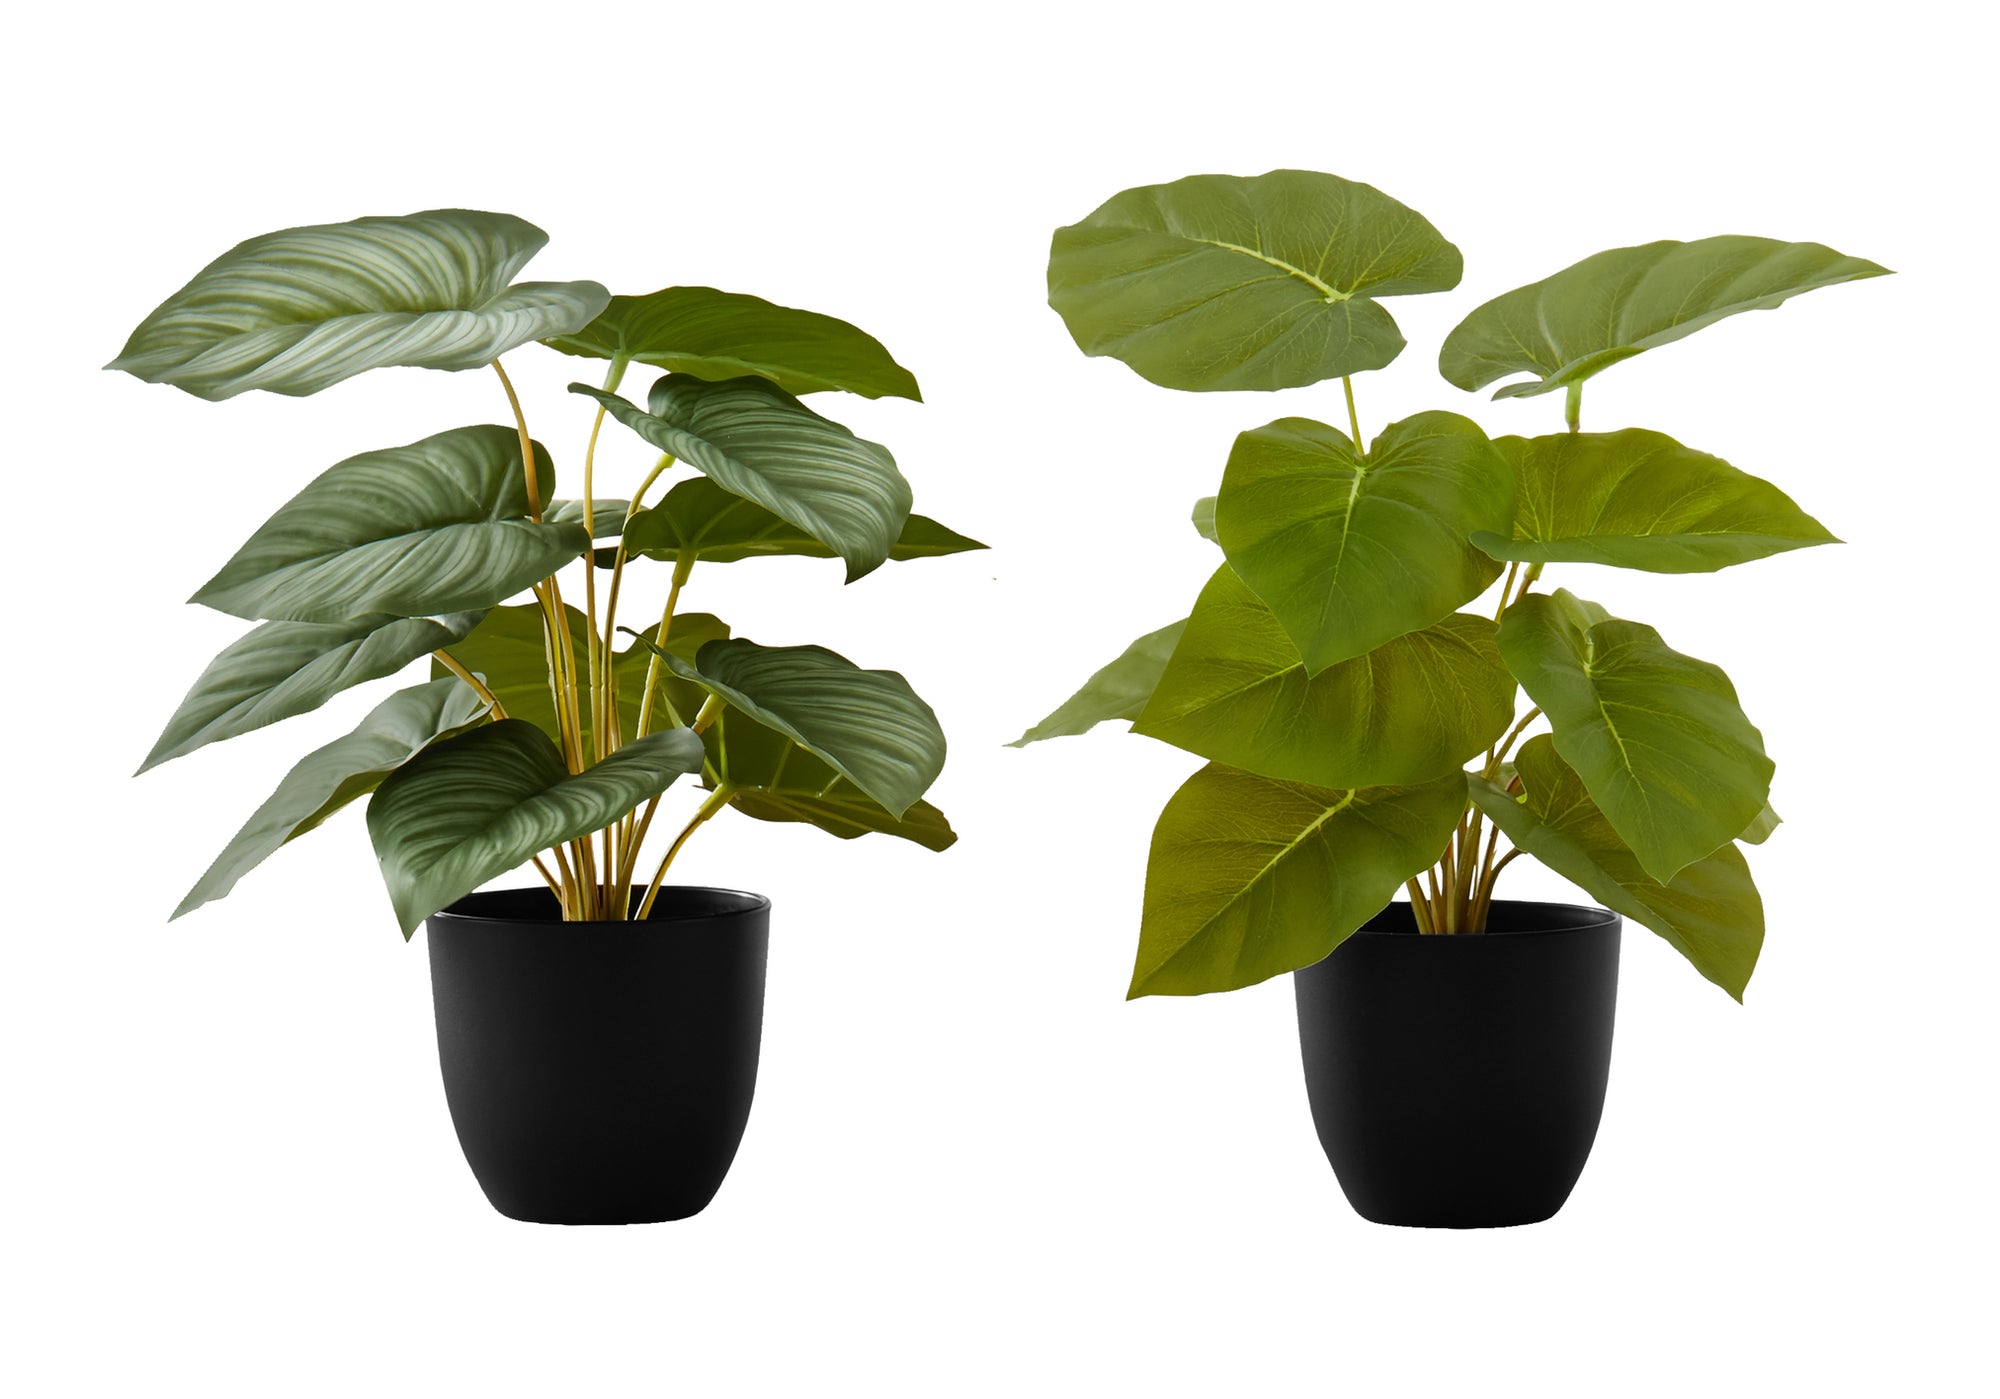 MN-739583    Artificial Plant, 13" Tall, Epipremnum, Indoor, Faux, Fake, Table, Greenery, Potted, Set Of 2, Decorative, Green Leaves, Black Pots